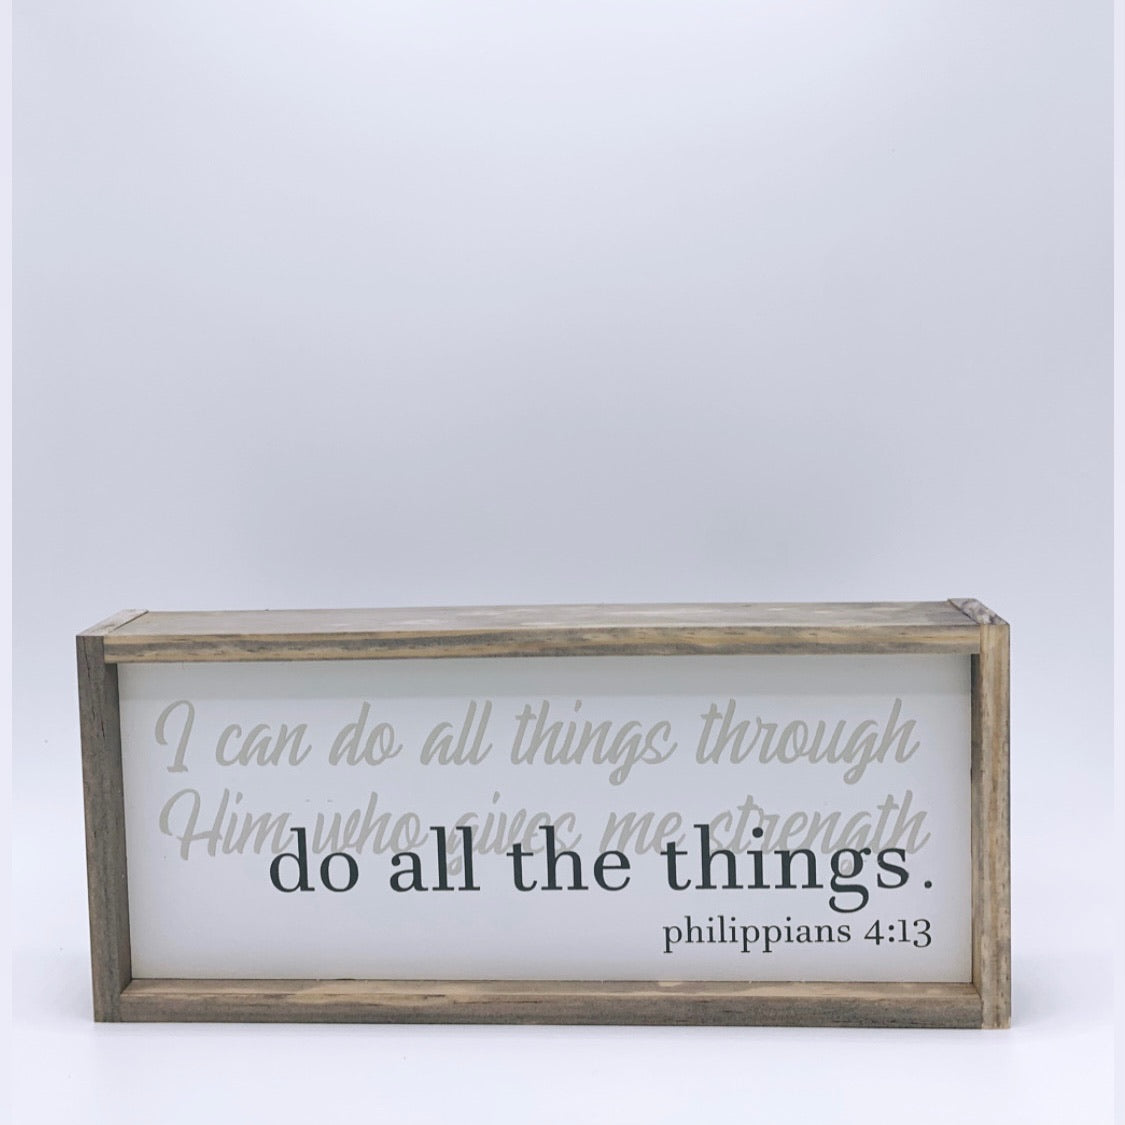 Do all the things (Philippians 4:13)